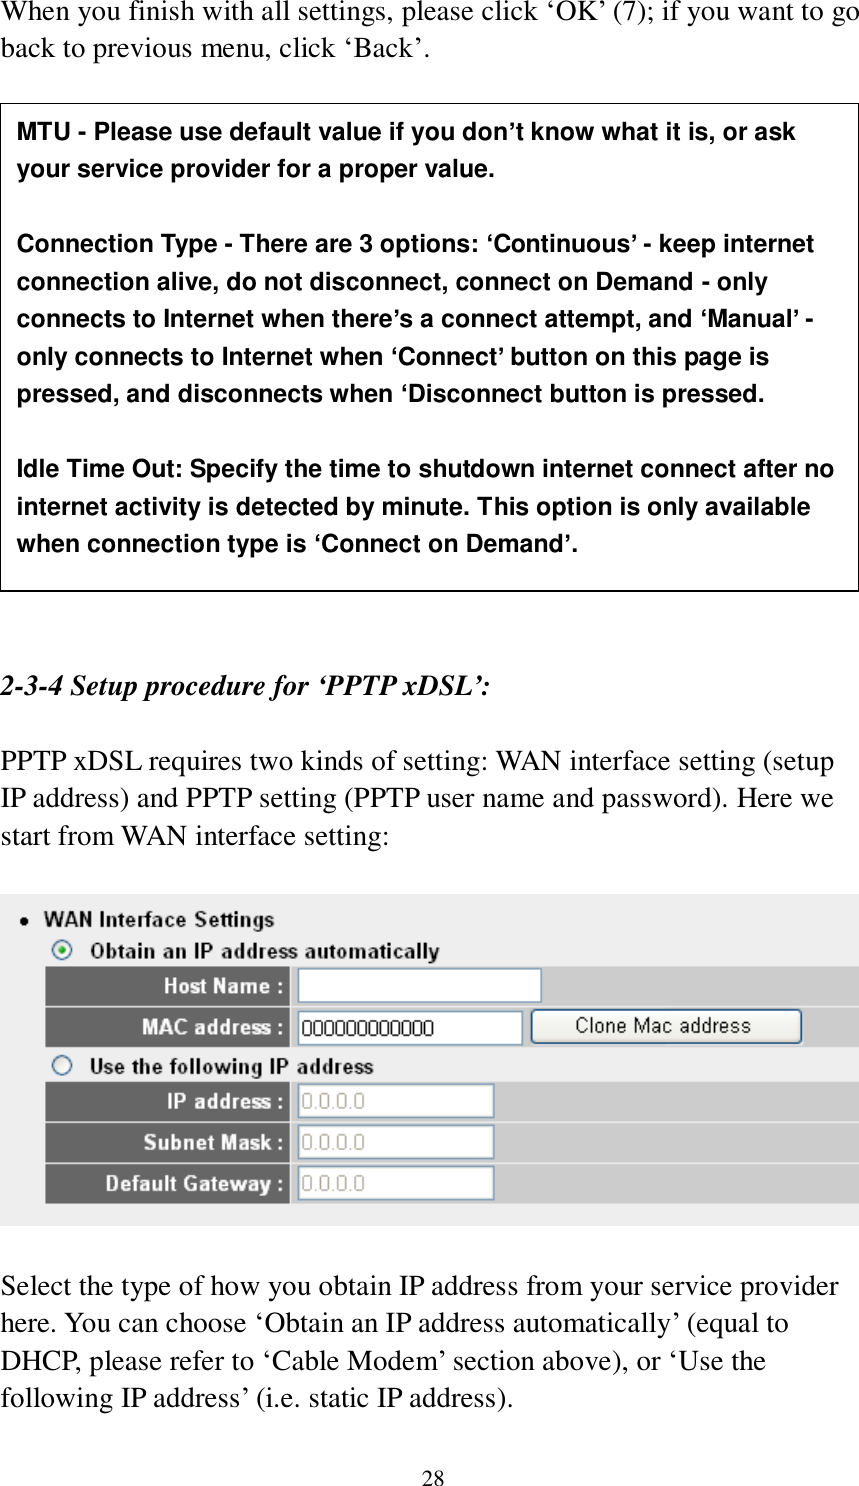 28 When you finish with all settings, please click „OK‟ (7); if you want to go back to previous menu, click „Back‟.                   2-3-4 Setup procedure for ‘PPTP xDSL’:  PPTP xDSL requires two kinds of setting: WAN interface setting (setup IP address) and PPTP setting (PPTP user name and password). Here we start from WAN interface setting:    Select the type of how you obtain IP address from your service provider here. You can choose „Obtain an IP address automatically‟ (equal to DHCP, please refer to „Cable Modem‟ section above), or „Use the following IP address‟ (i.e. static IP address).   MTU - Please use default value if you don’t know what it is, or ask your service provider for a proper value.  Connection Type - There are 3 options: ‘Continuous’ - keep internet connection alive, do not disconnect, connect on Demand - only connects to Internet when there’s a connect attempt, and ‘Manual’ - only connects to Internet when ‘Connect’ button on this page is pressed, and disconnects when ‘Disconnect button is pressed.  Idle Time Out: Specify the time to shutdown internet connect after no internet activity is detected by minute. This option is only available when connection type is ‘Connect on Demand’. 